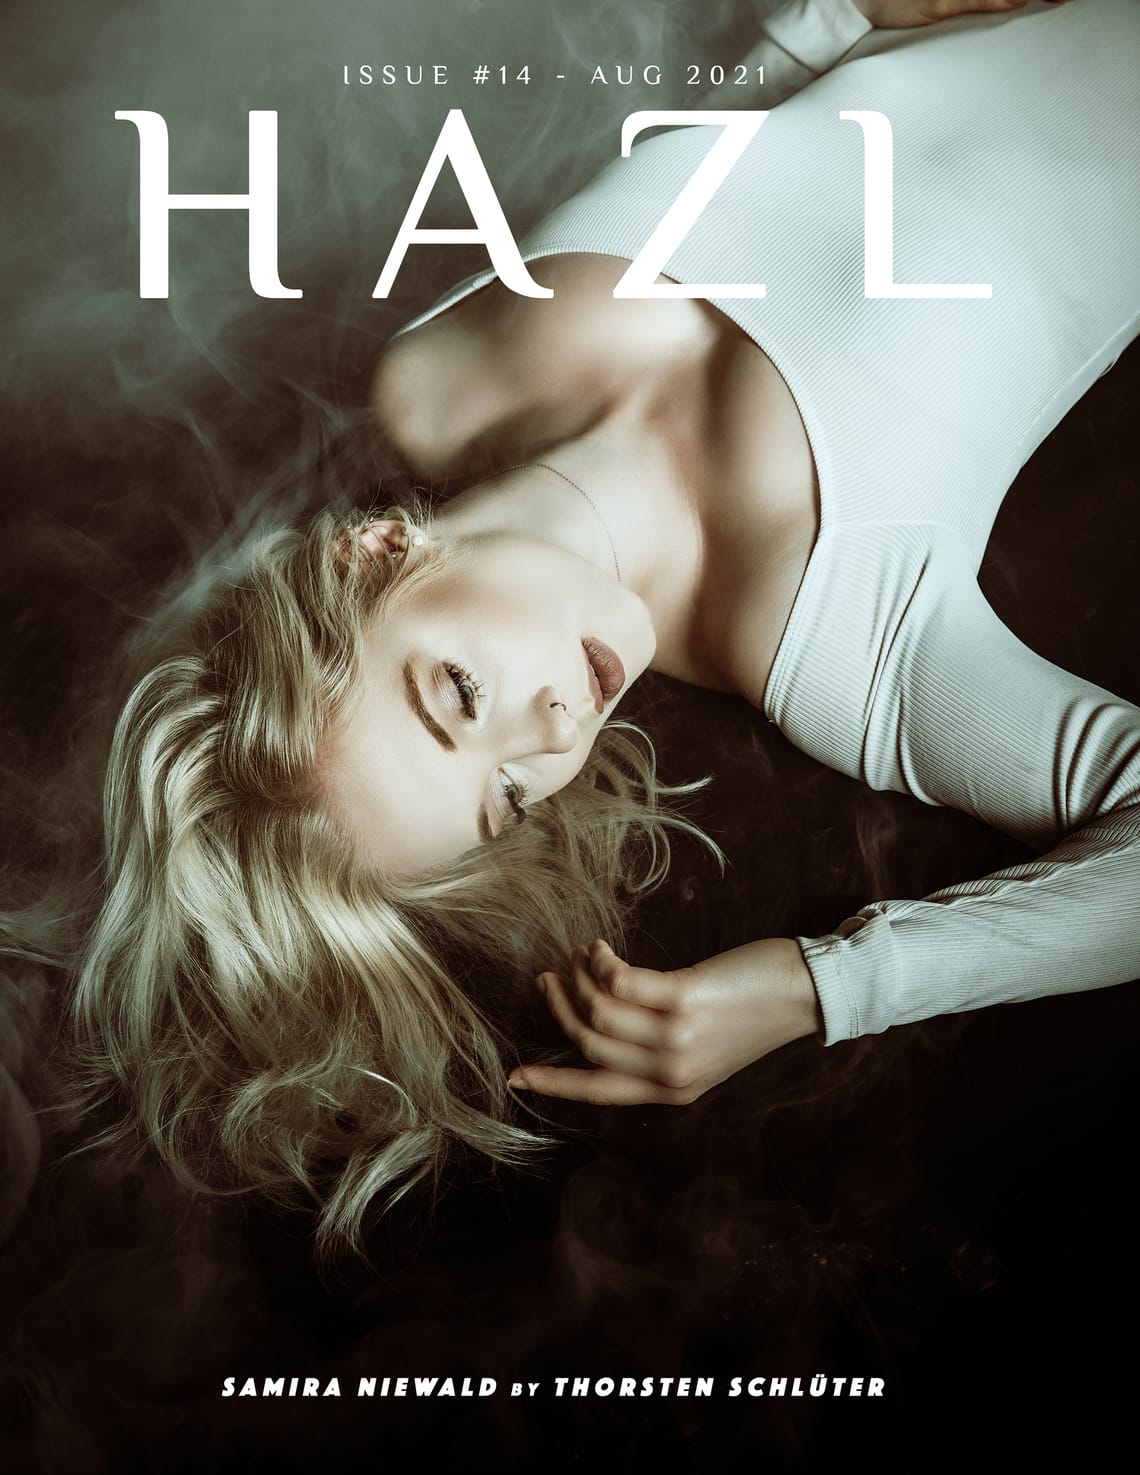 HAZL Magazine Issue #14 -  August 2021 Launched Worldwide